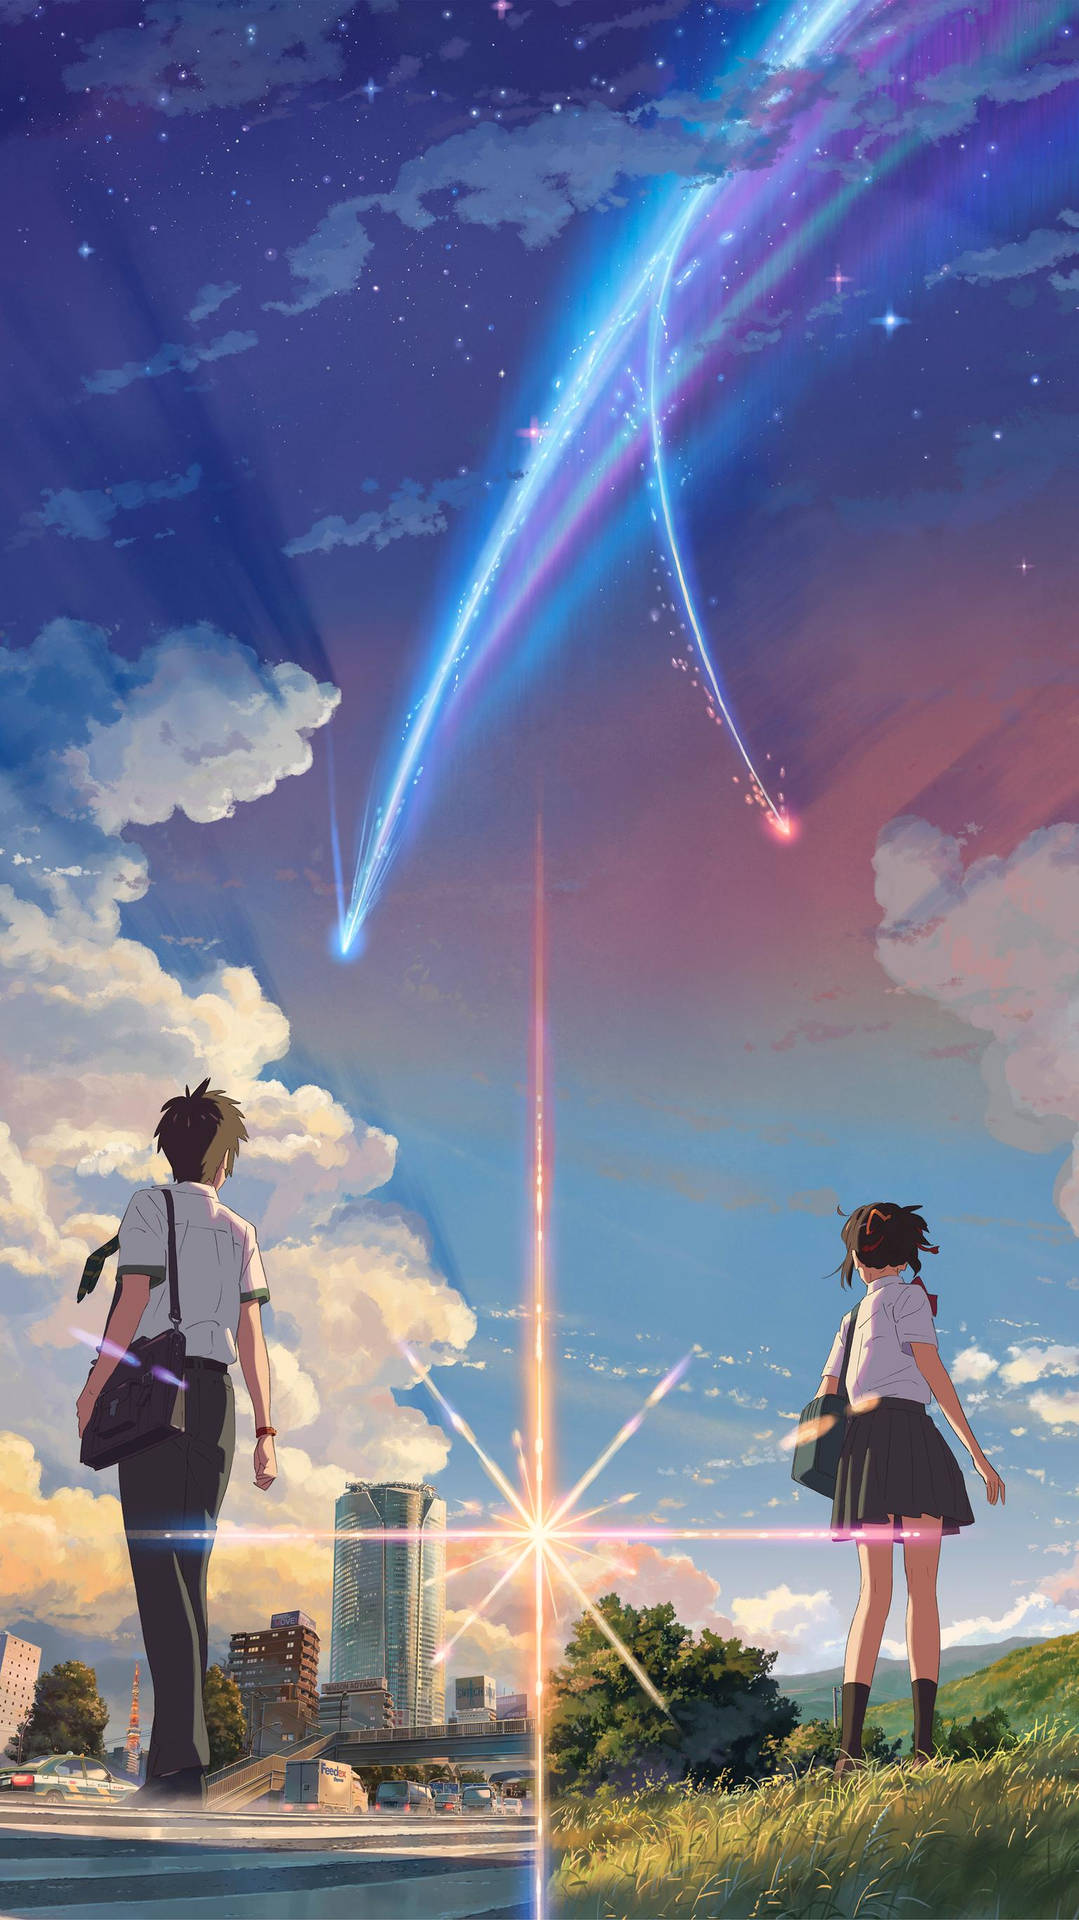 Free Your Name Wallpaper Downloads, [200+] Your Name Wallpapers for FREE |  